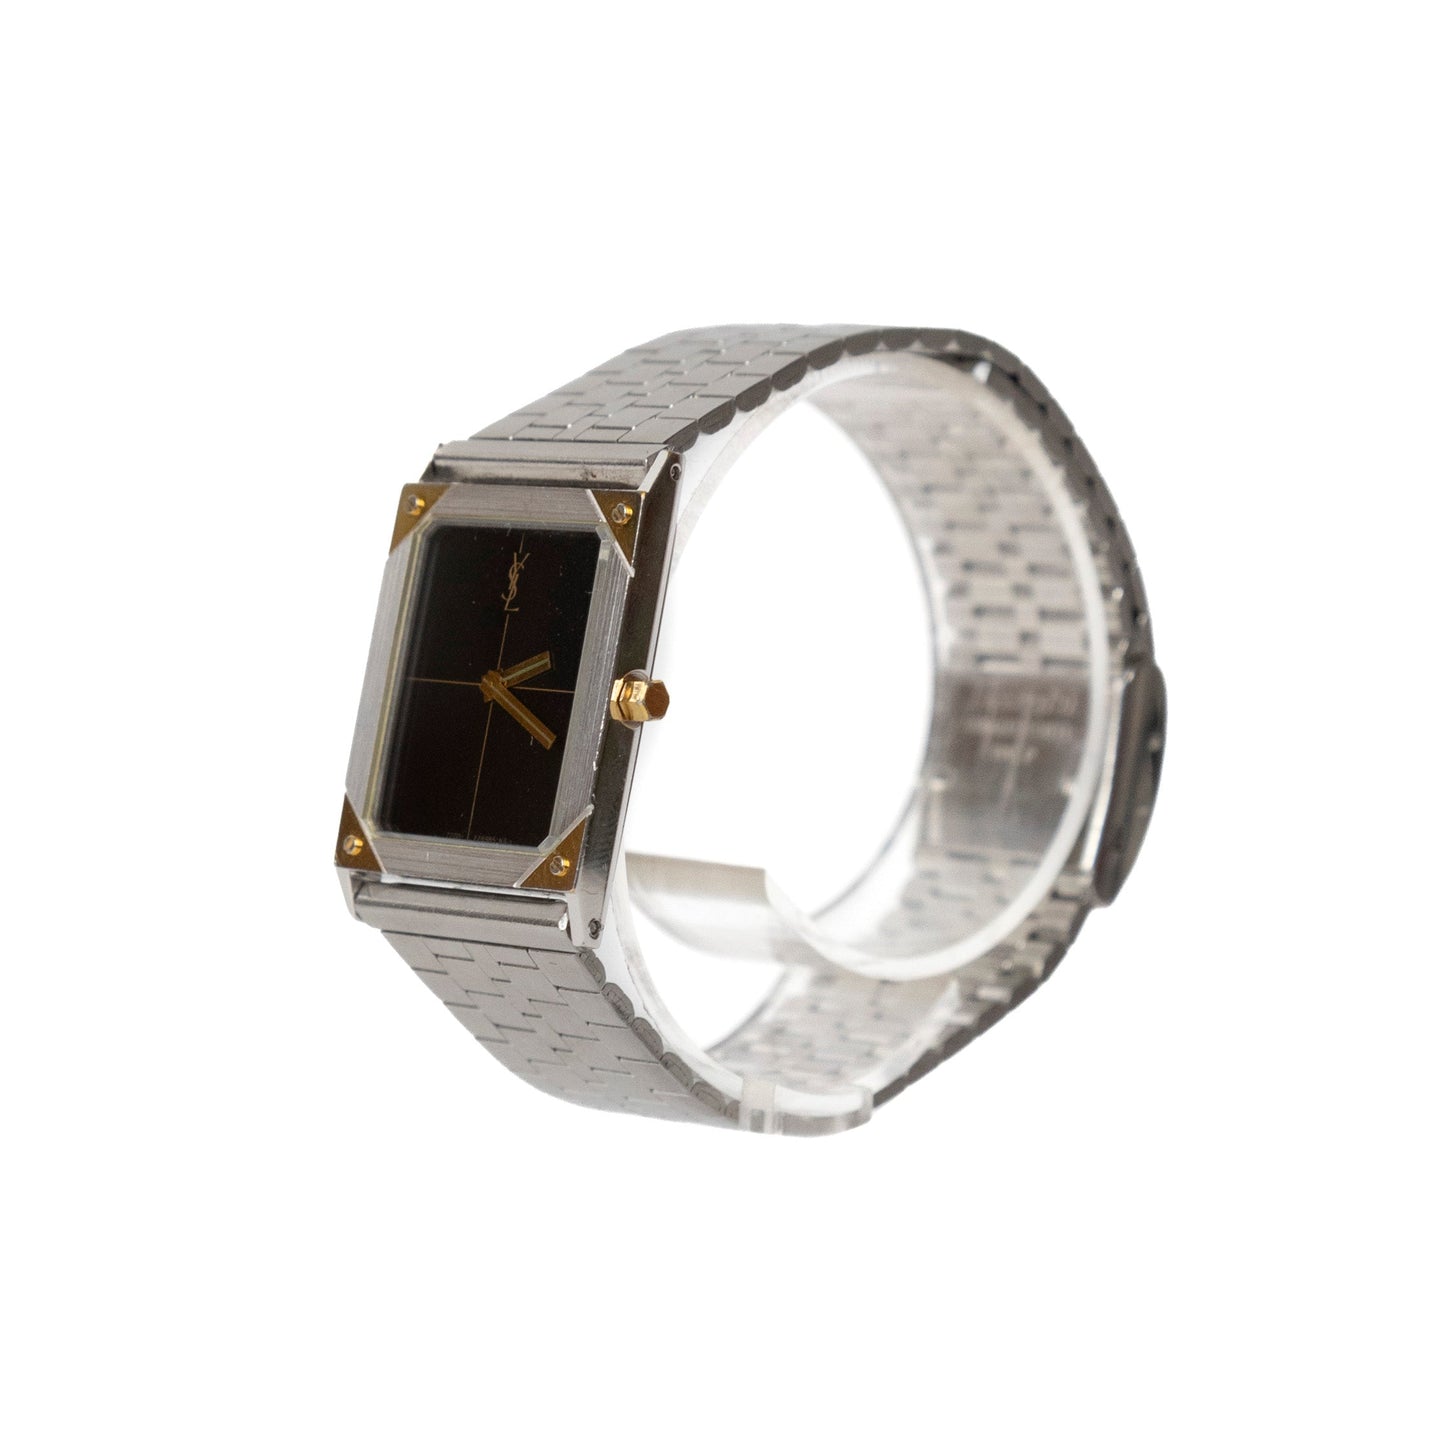 YSL Model 3861 18K Gold Plated Watch